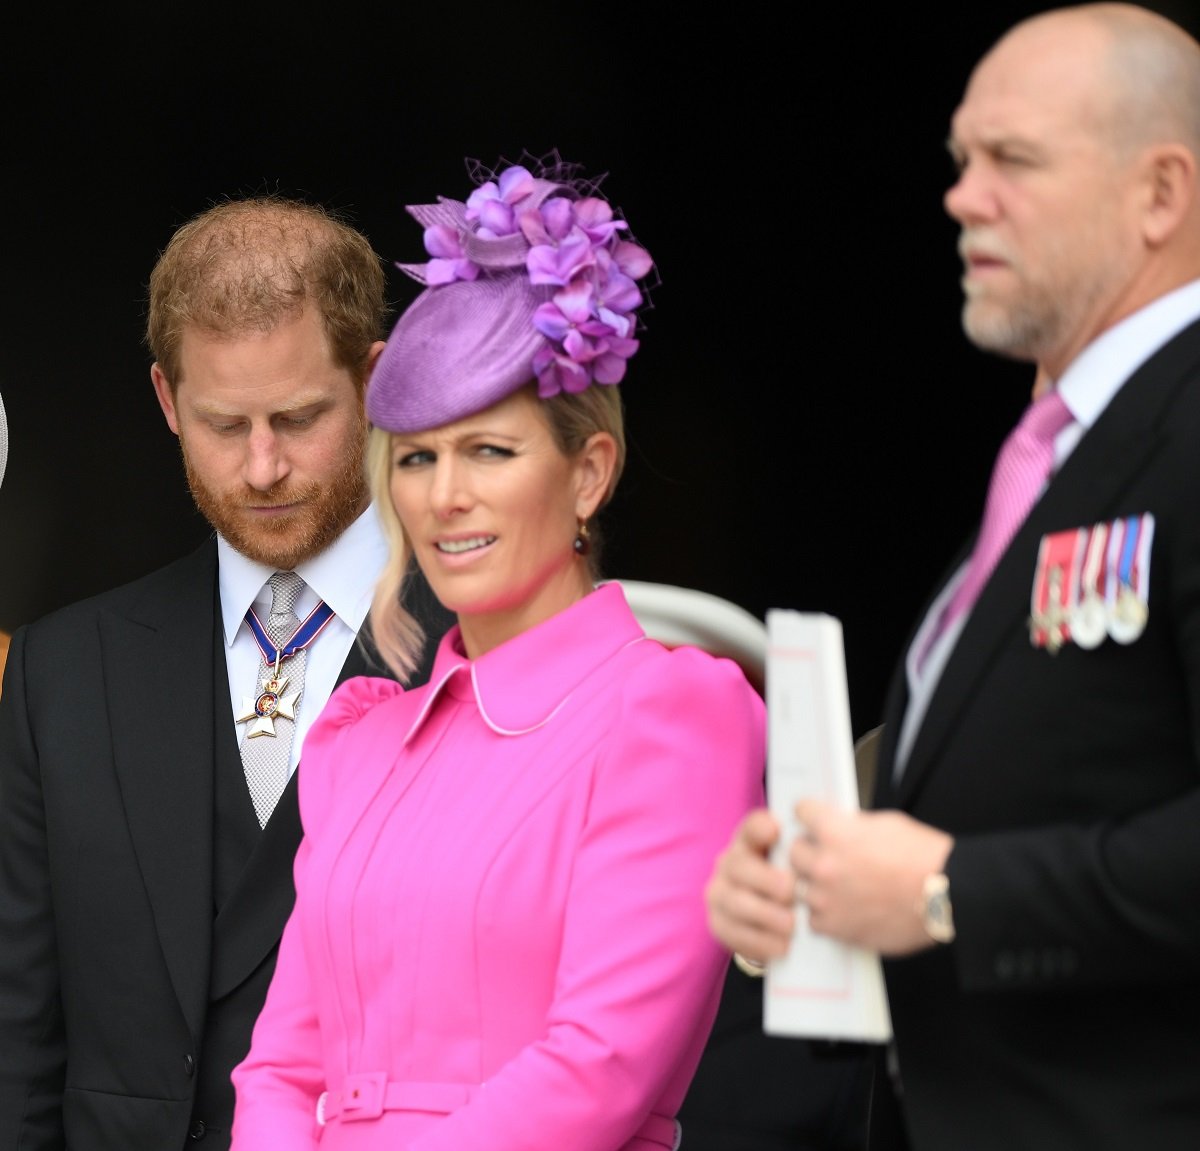 Prince Harry, Zara Tindall, and Mike Tindall following the service of Thanksgiving for Queen Elizabeth's reign